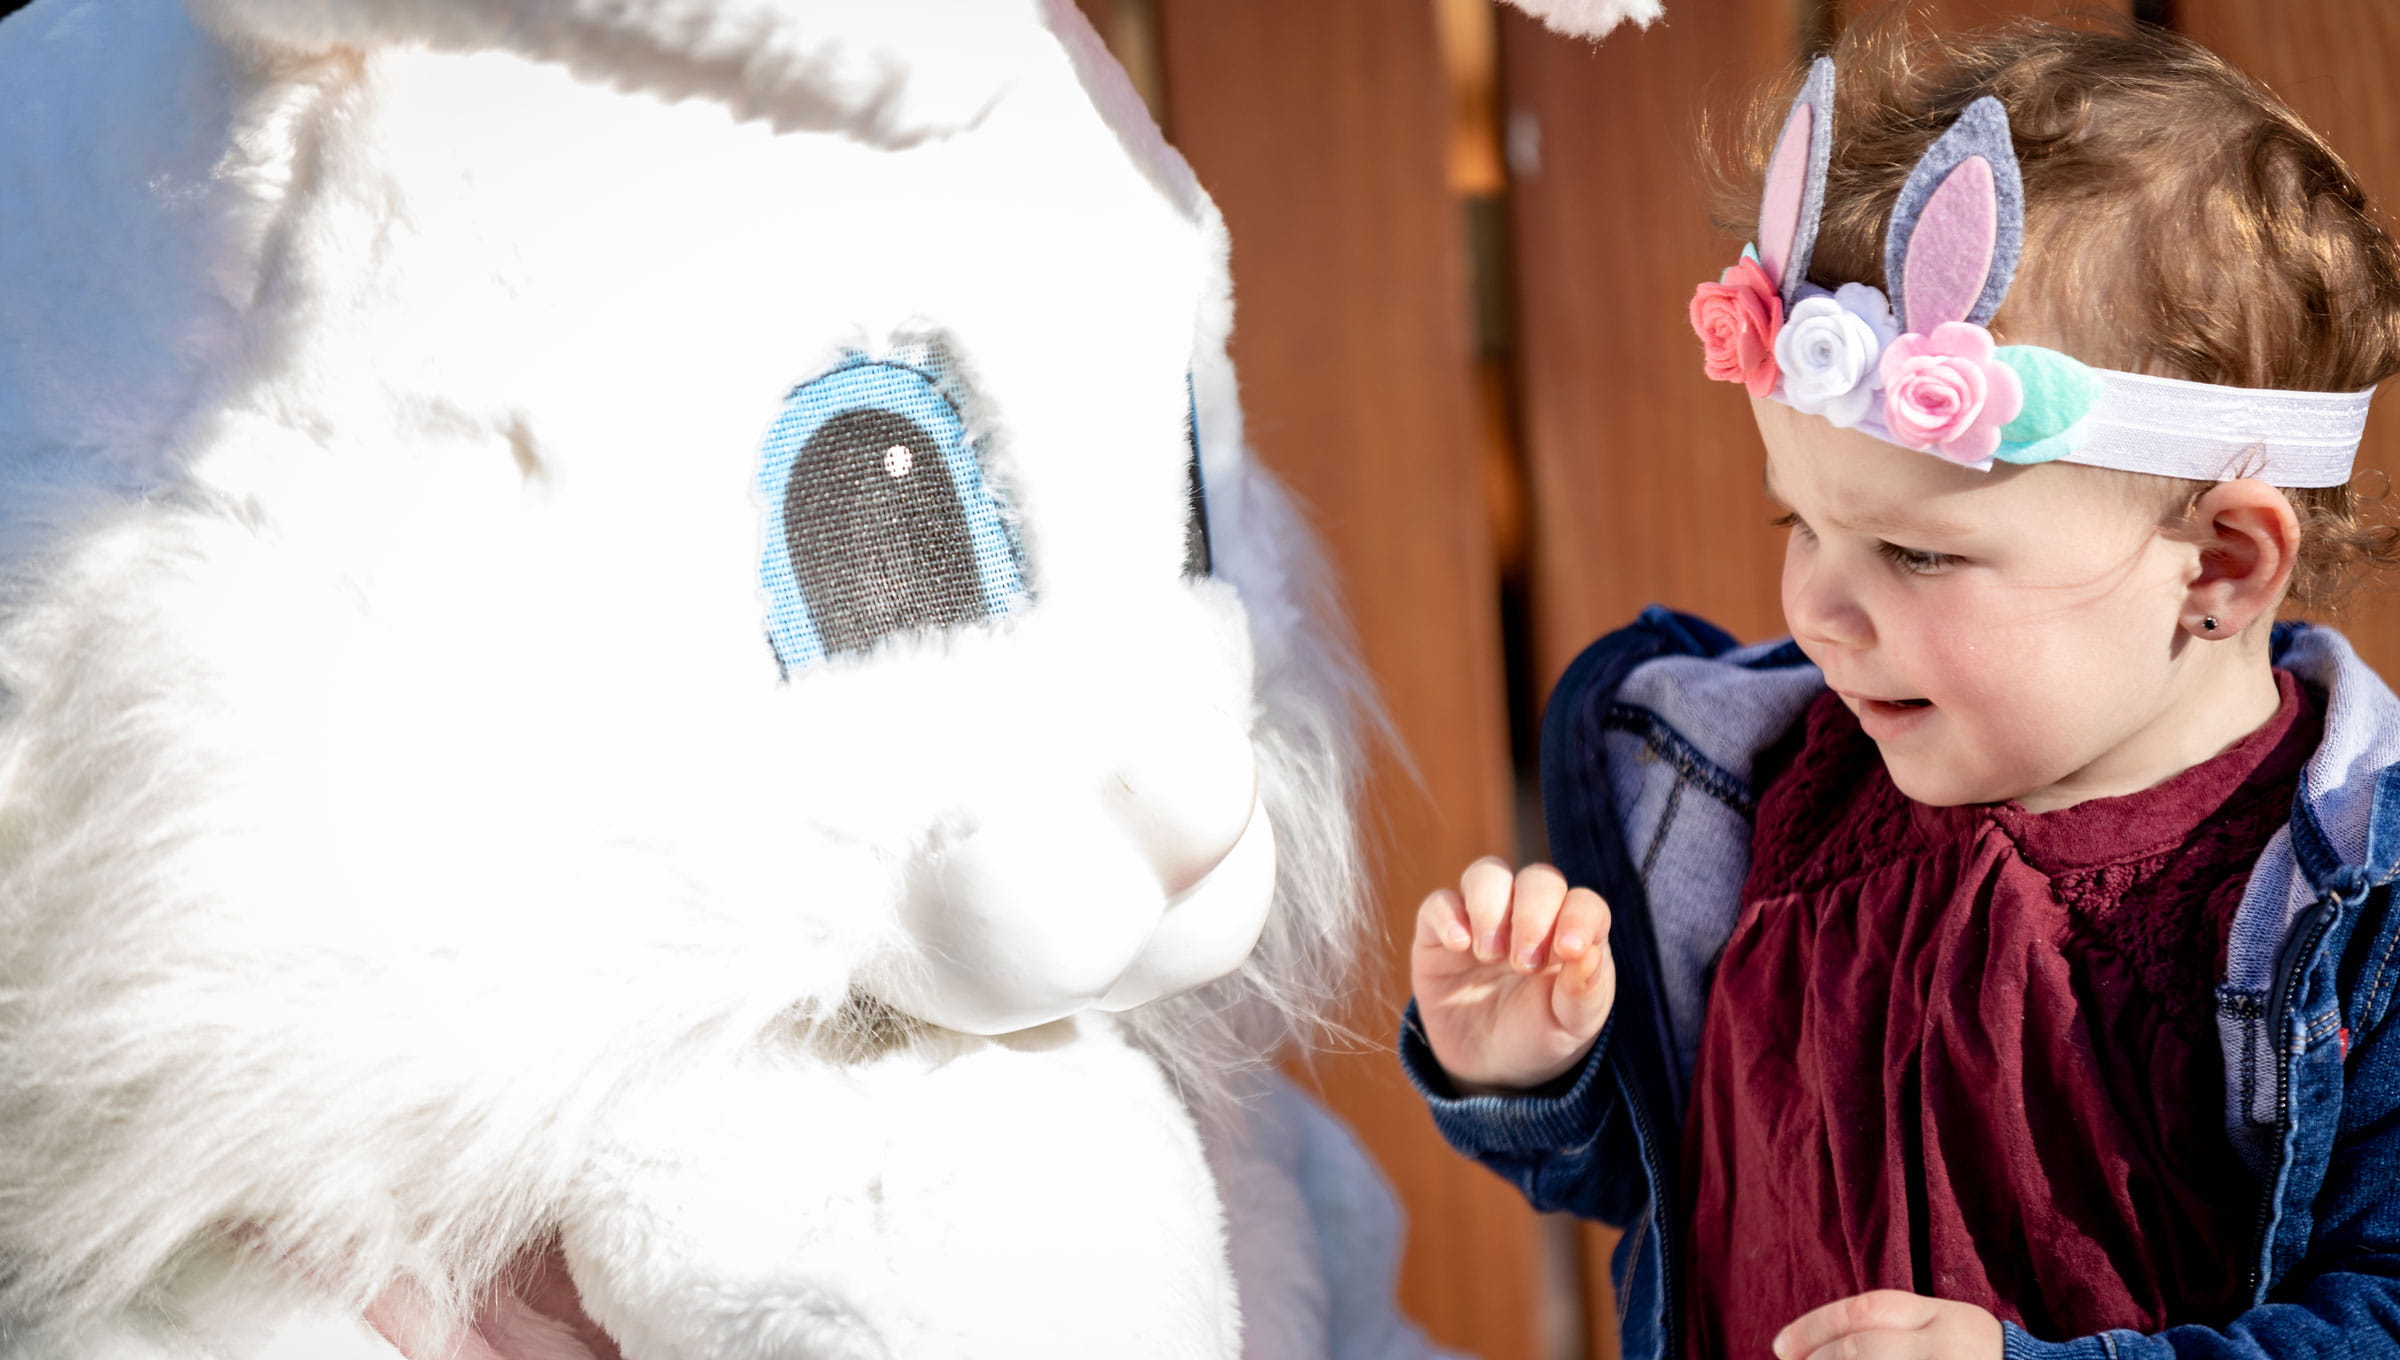 Little girl wearing a headband taking a photo with the easter bunny